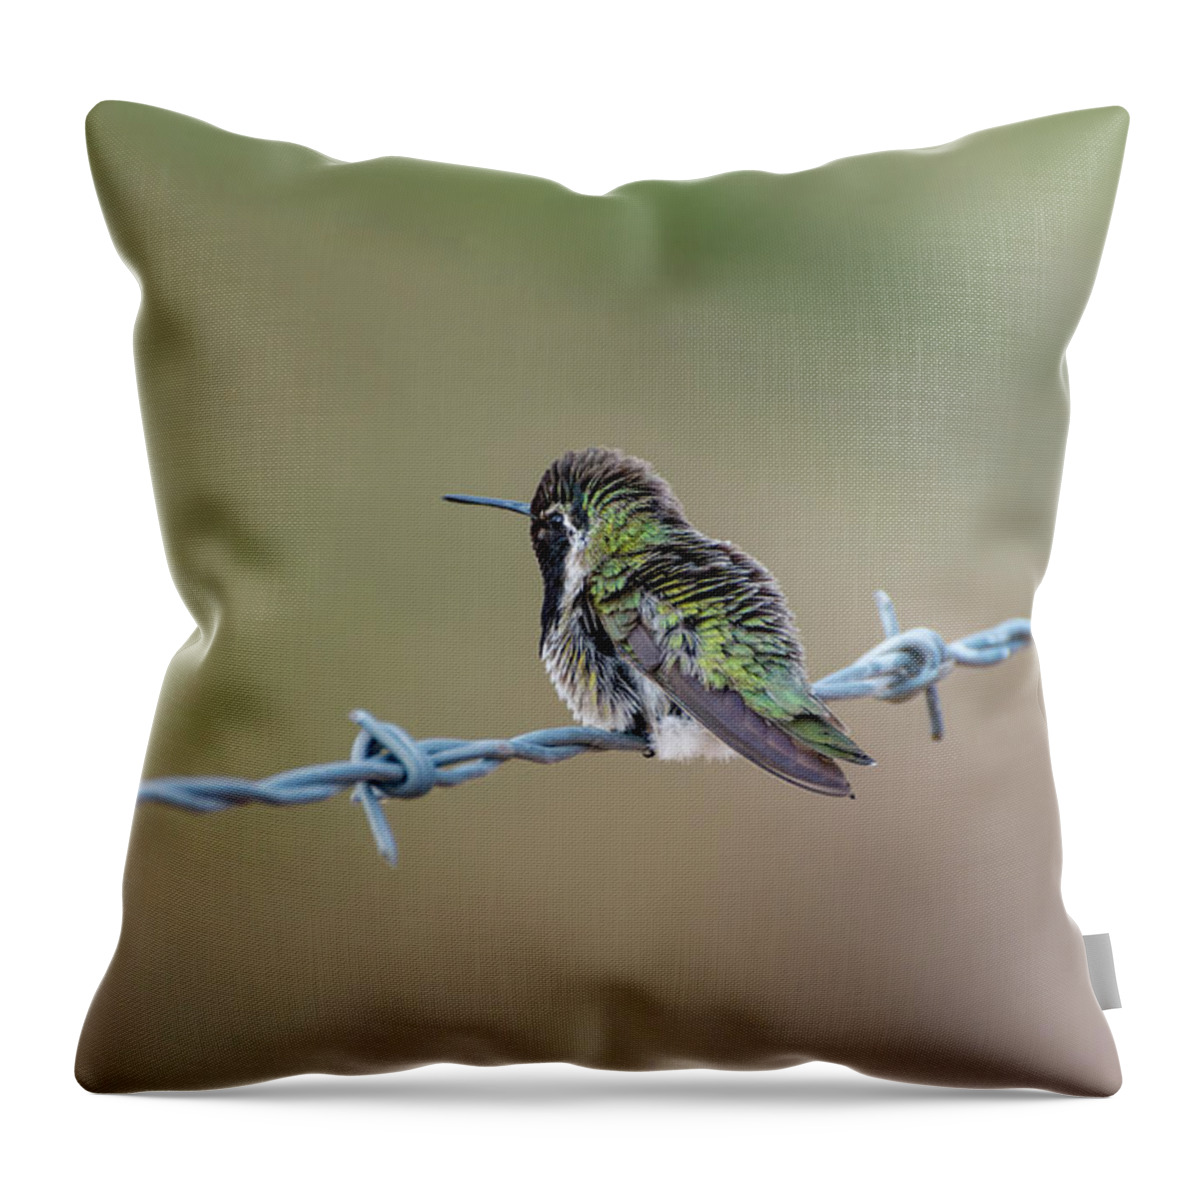 Nature Throw Pillow featuring the photograph Fluffy Hummingbird by Douglas Killourie